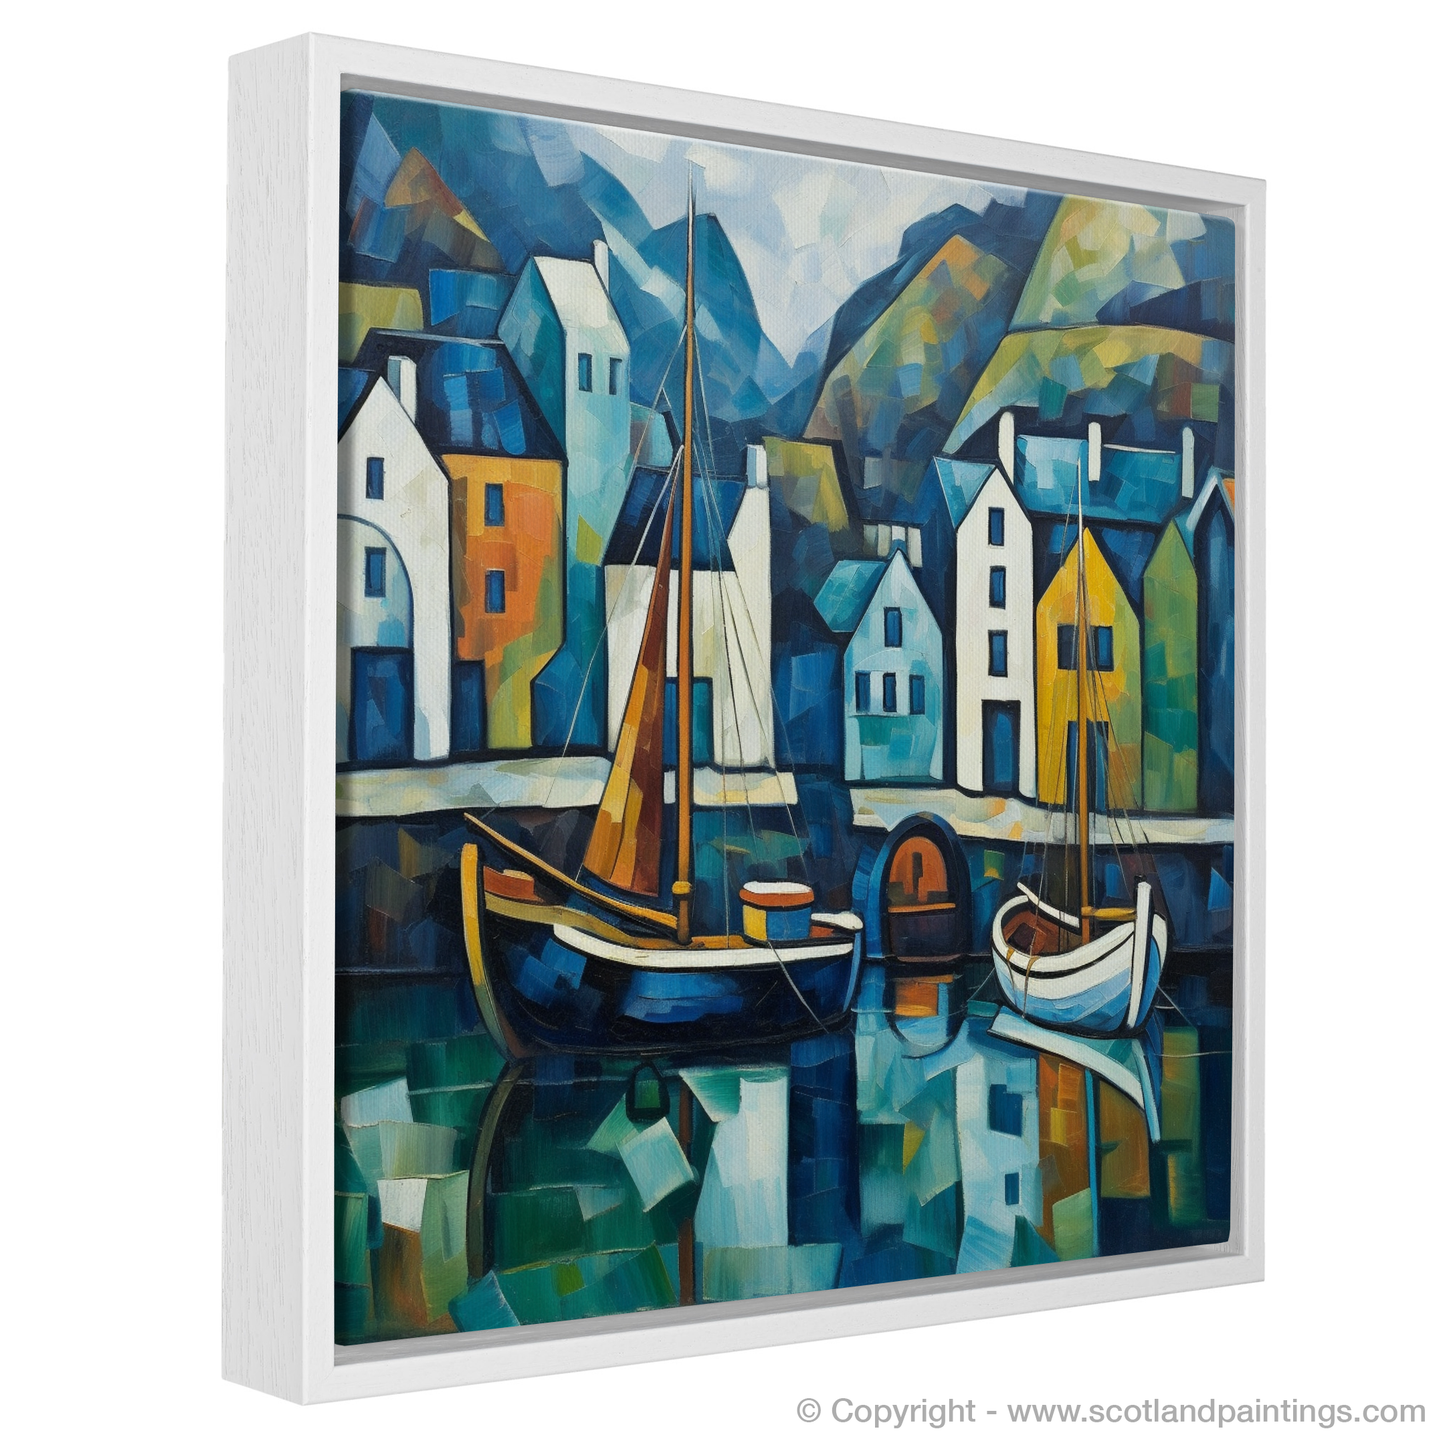 Cubist Portree: A Geometric Ode to the Scottish Harbour